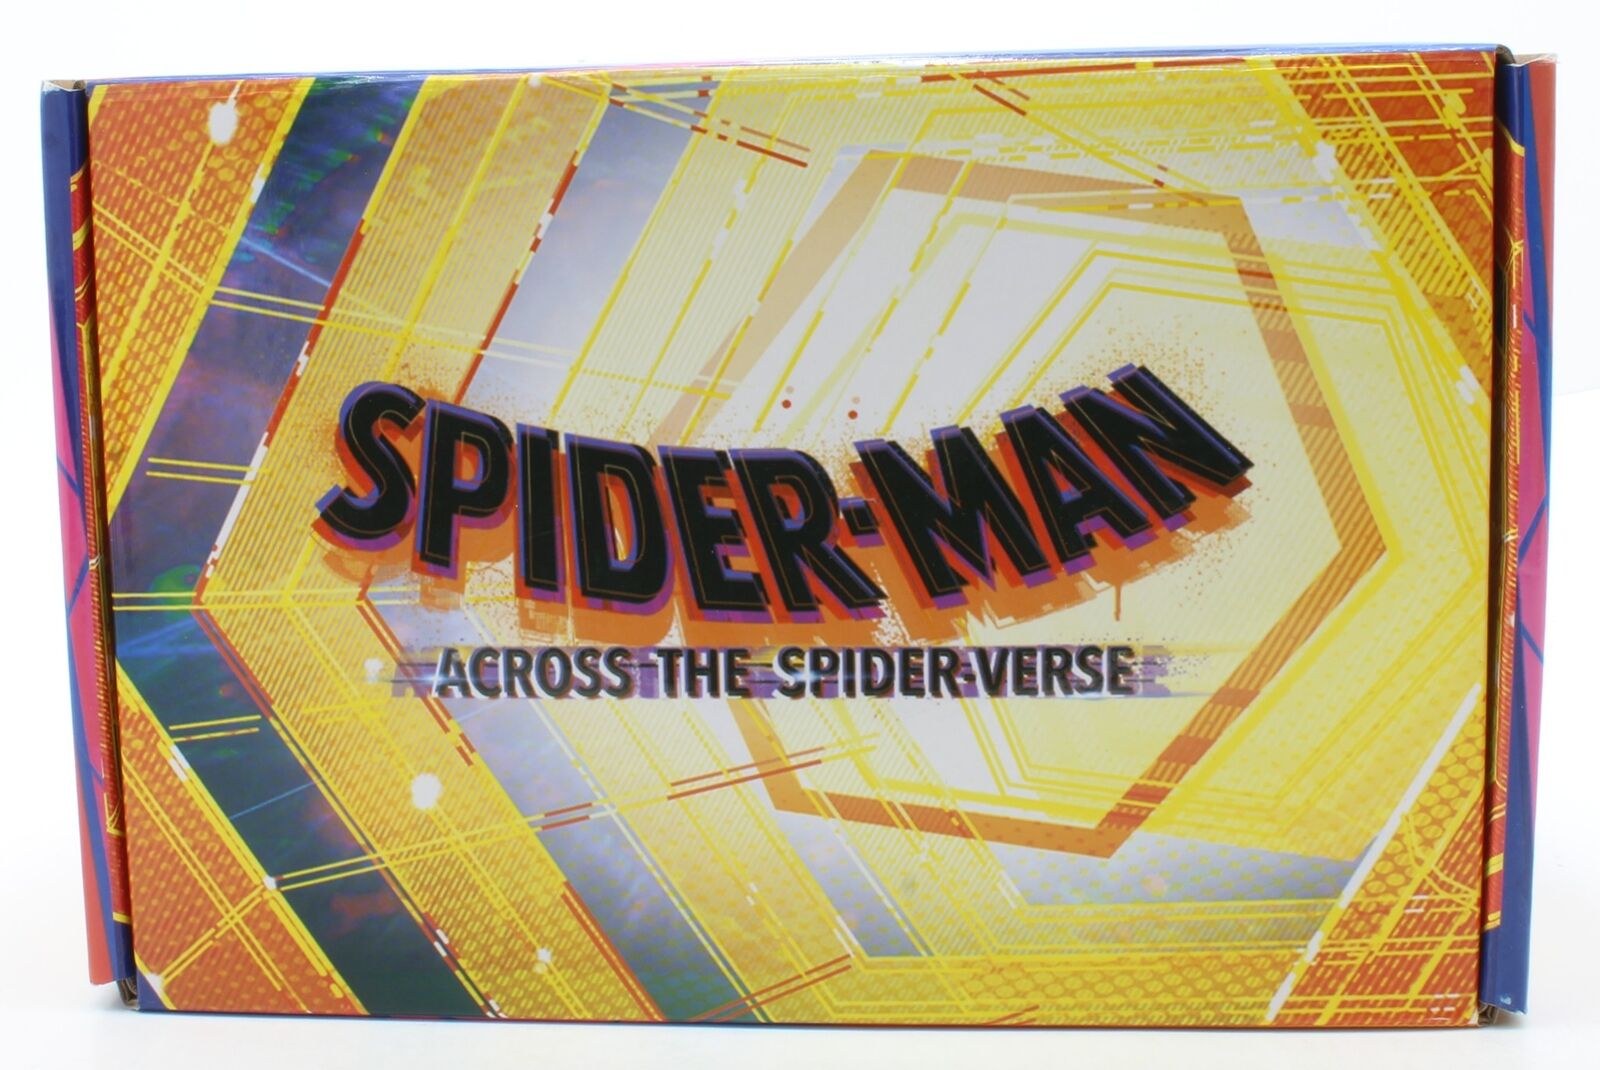 Funko - Marvel Collector Corps Spider-Man Across the Spider-Verse Box LG - 2022